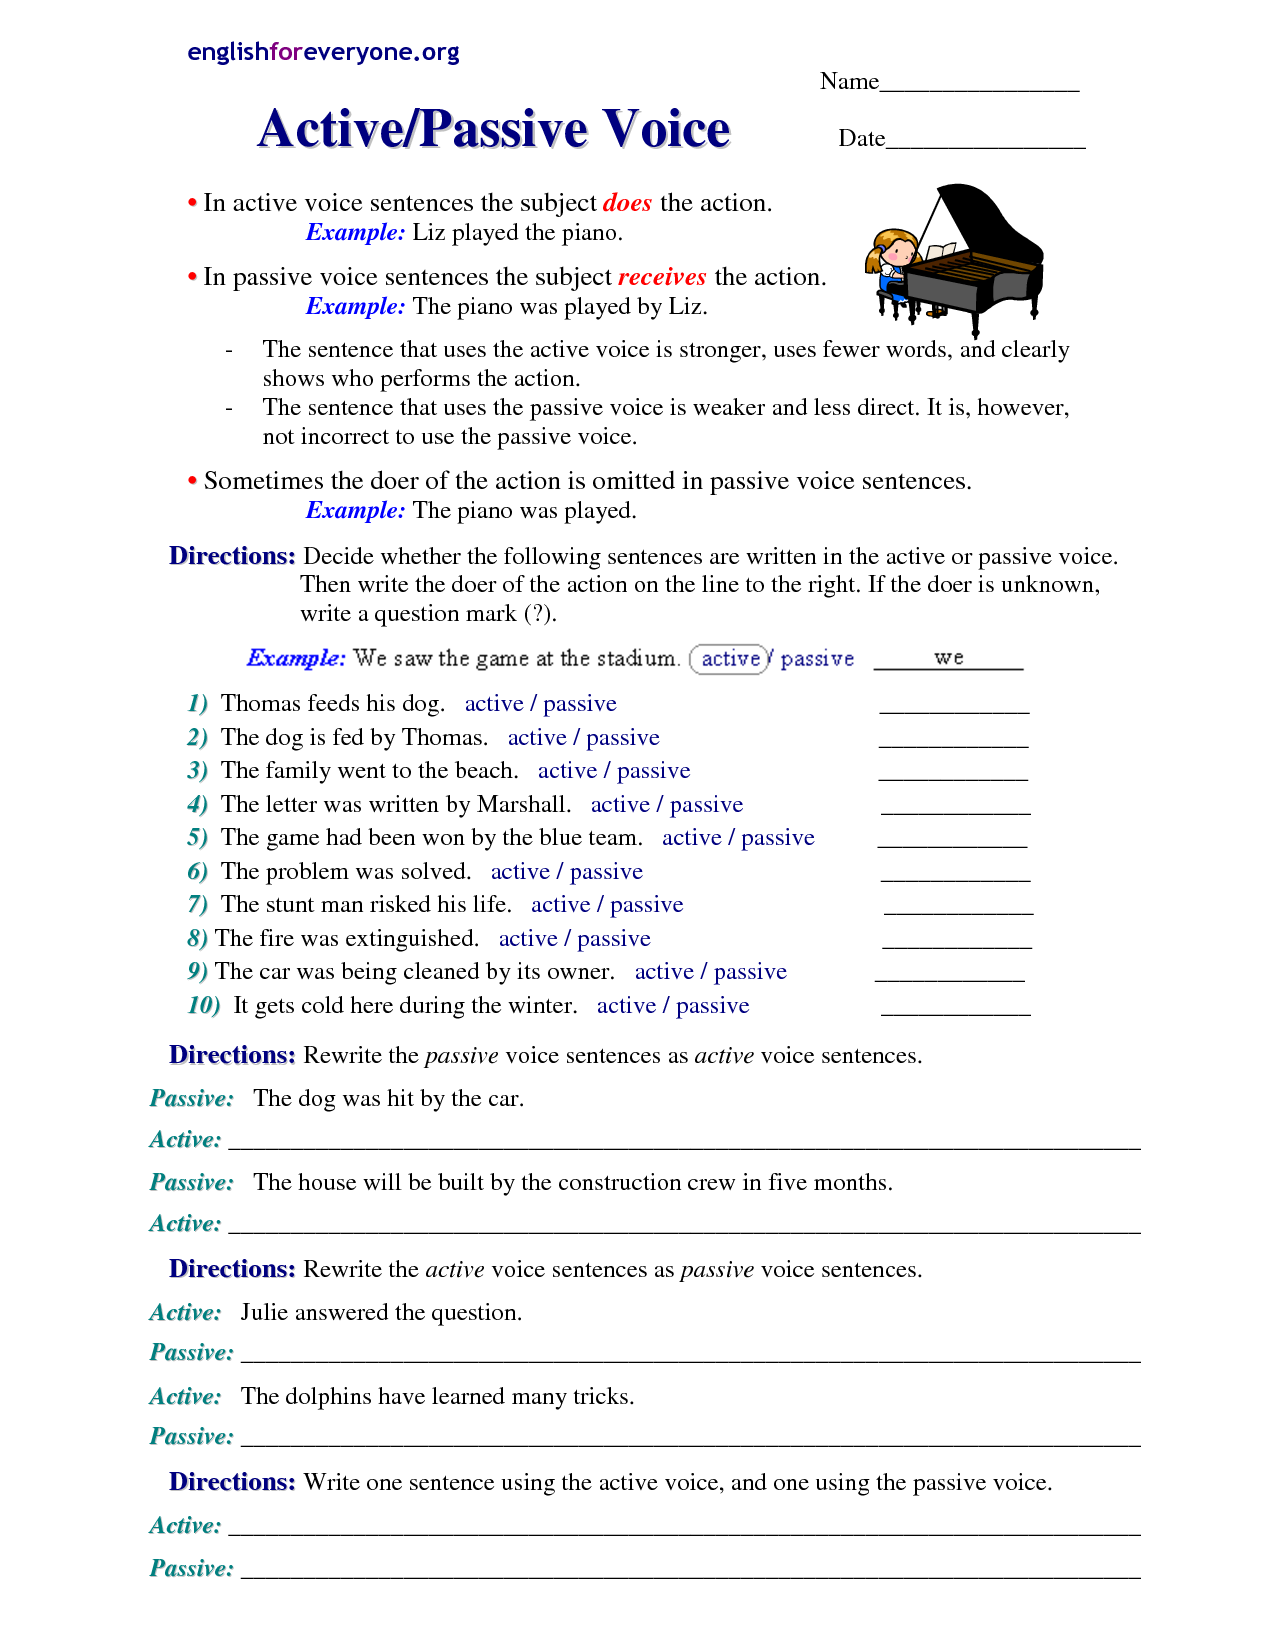 Active And Passive Voice Quiz For Class 7